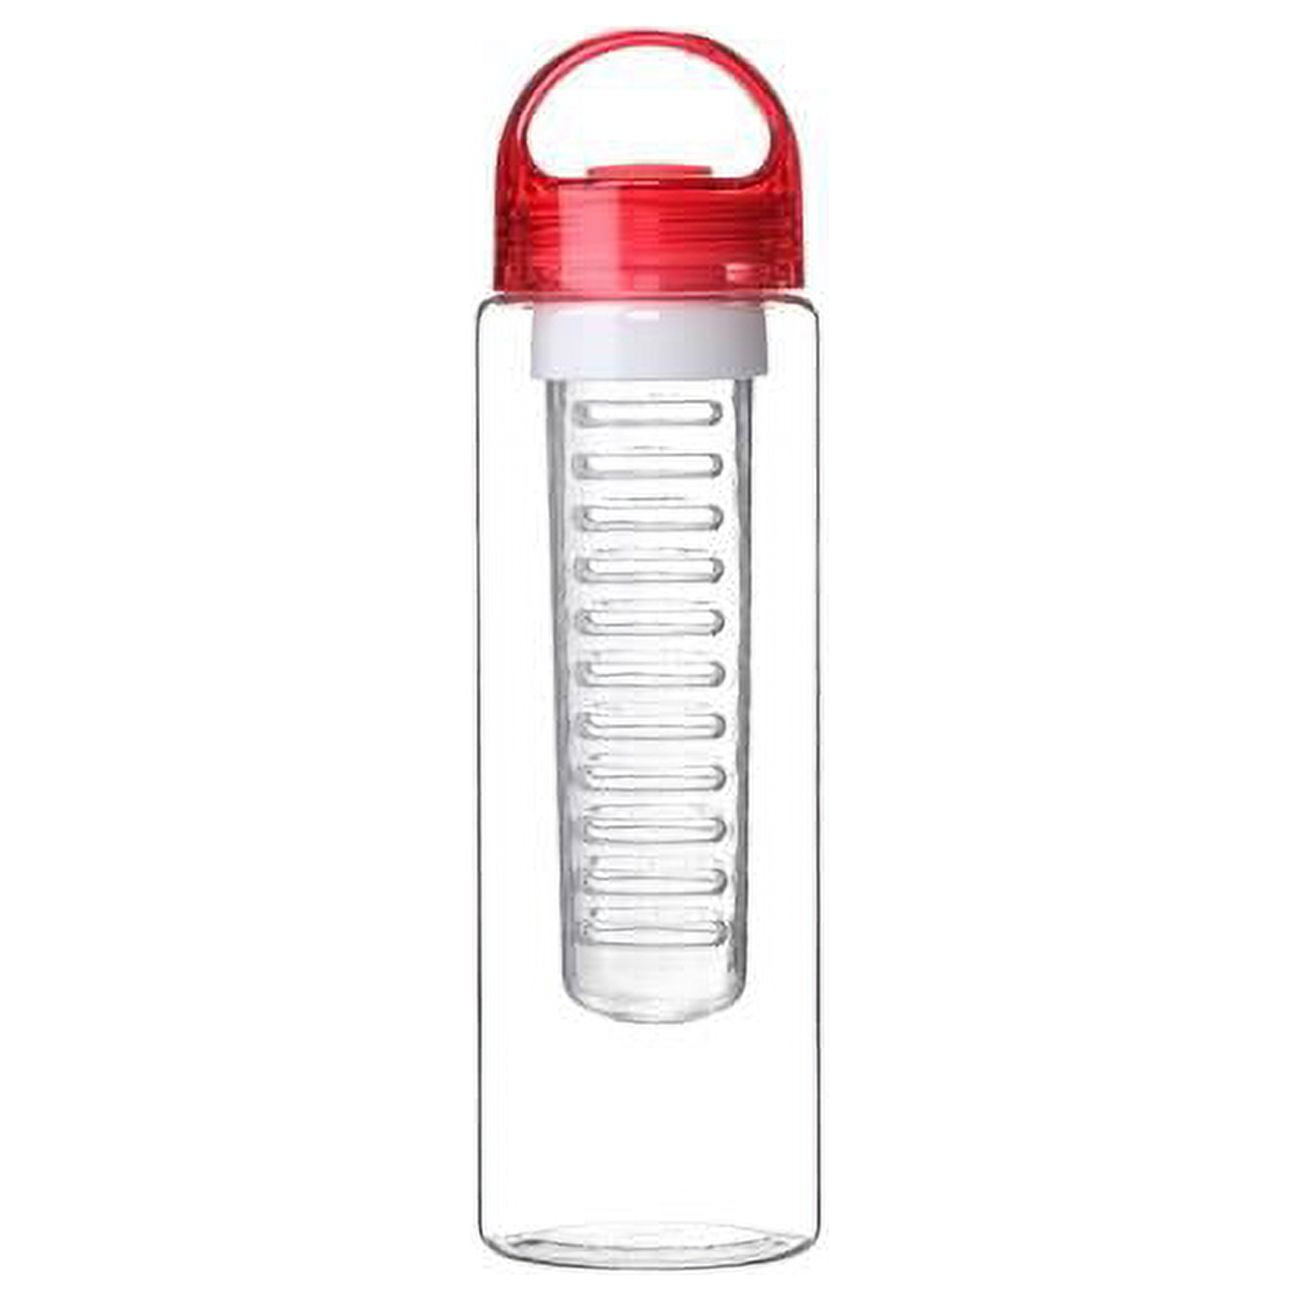 Ctewb-red 24 Oz Sport Fruit Infusion Water Bottle, Red